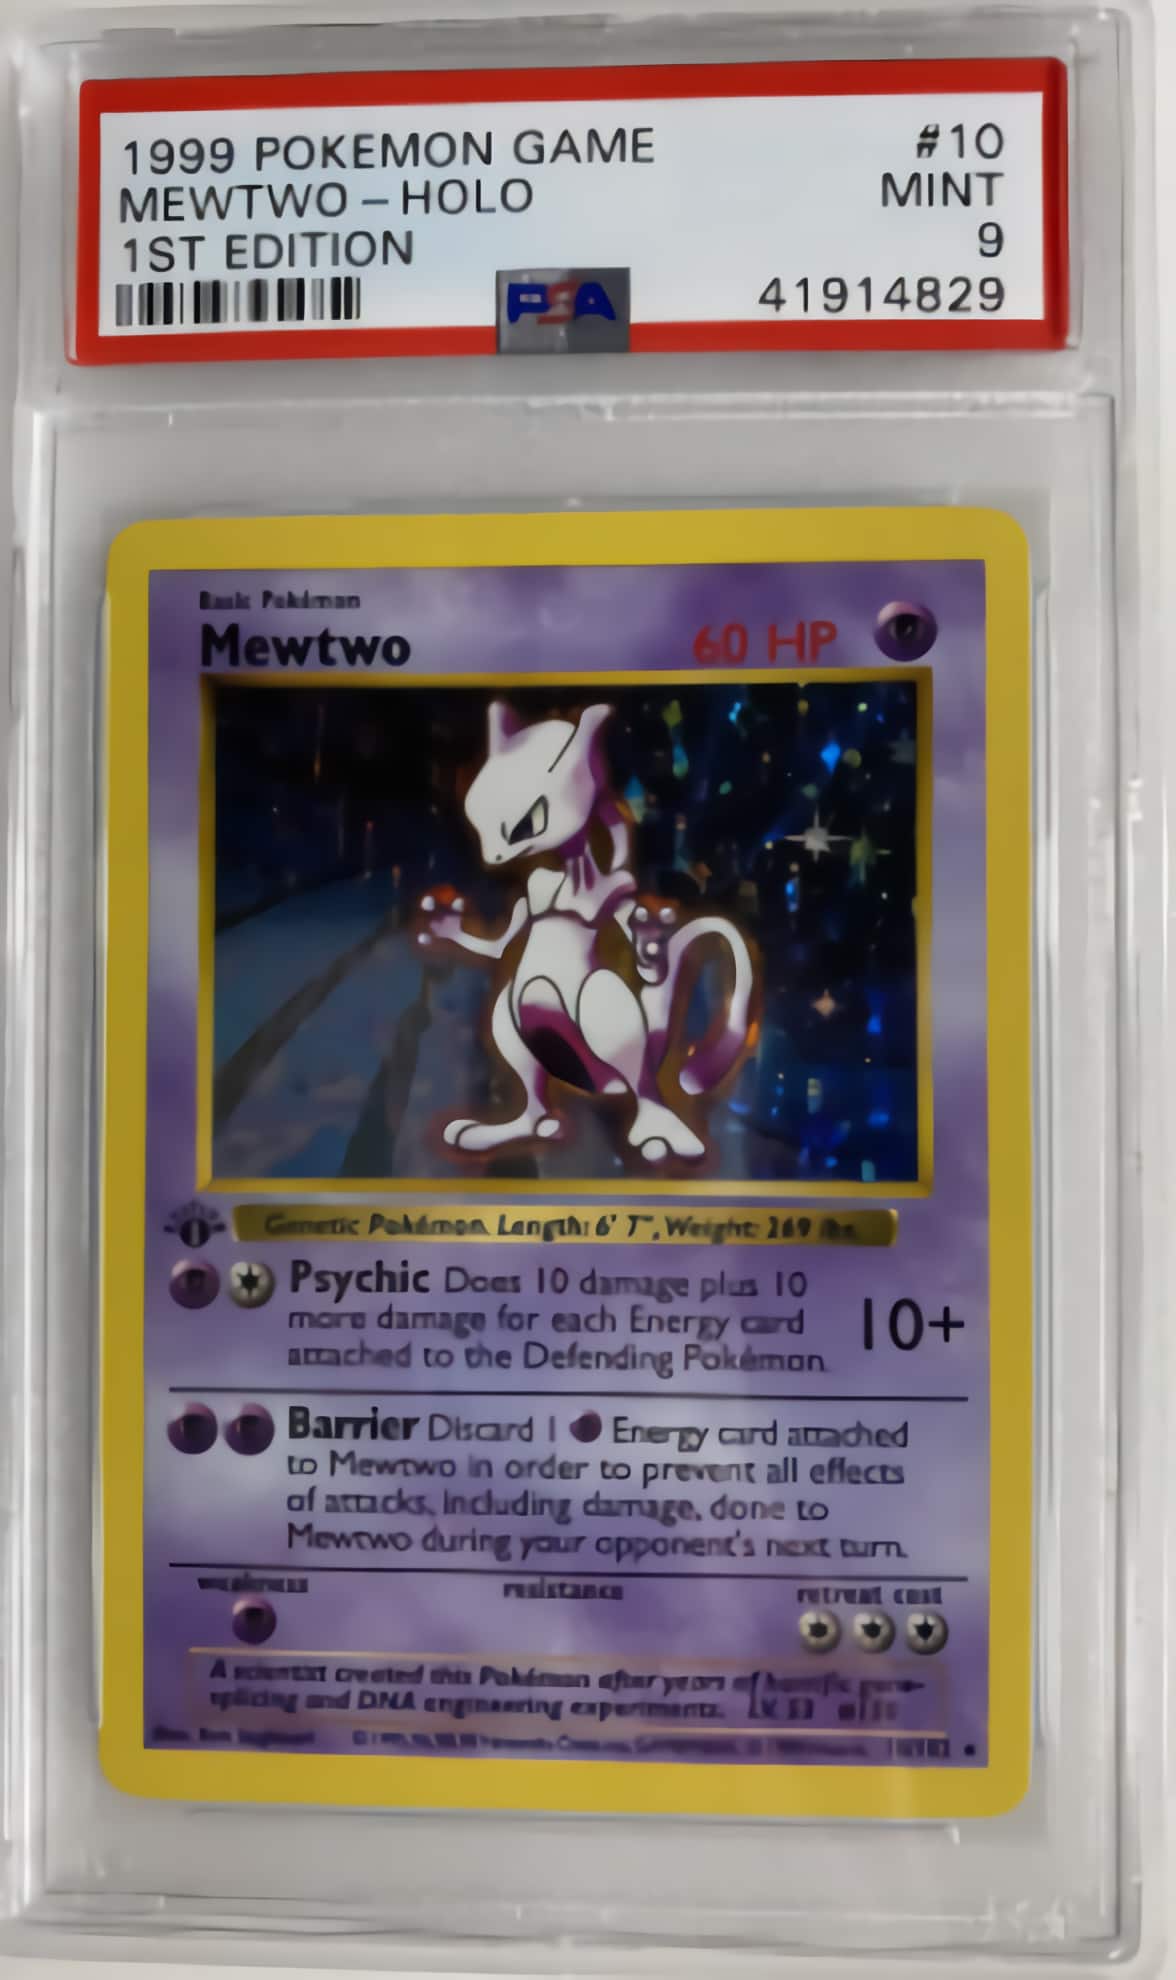 Here are the top 30 most expensive Pokemon cards in 2021